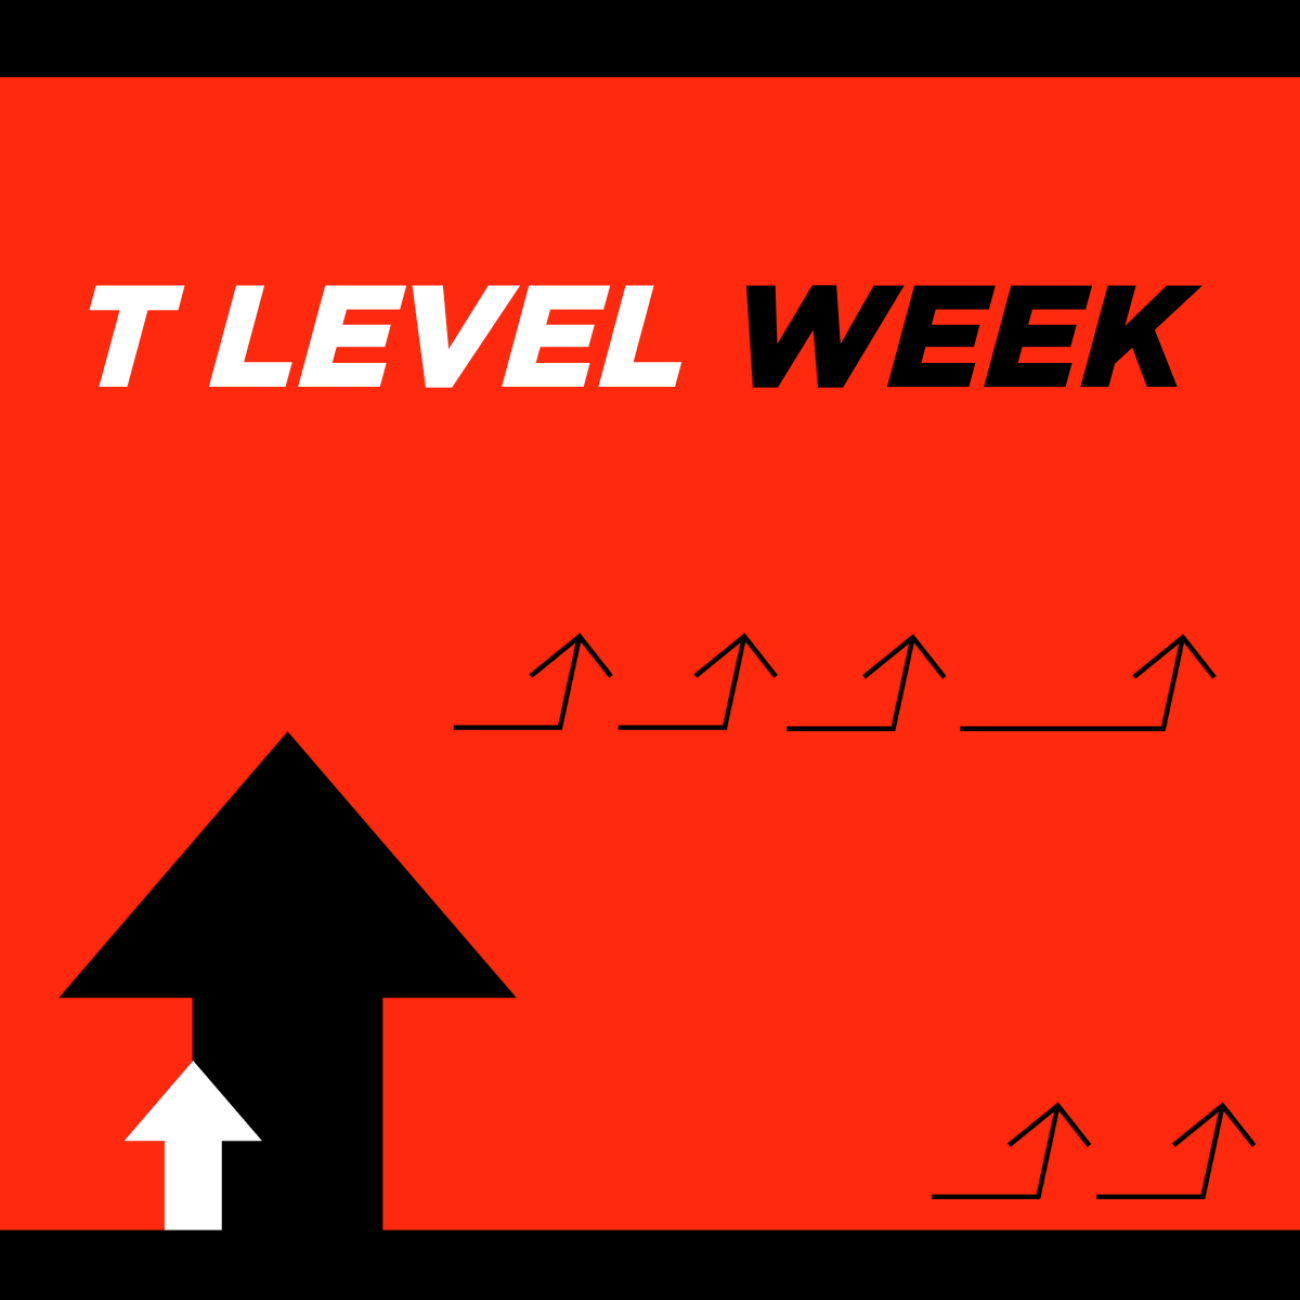 T Level week graphic